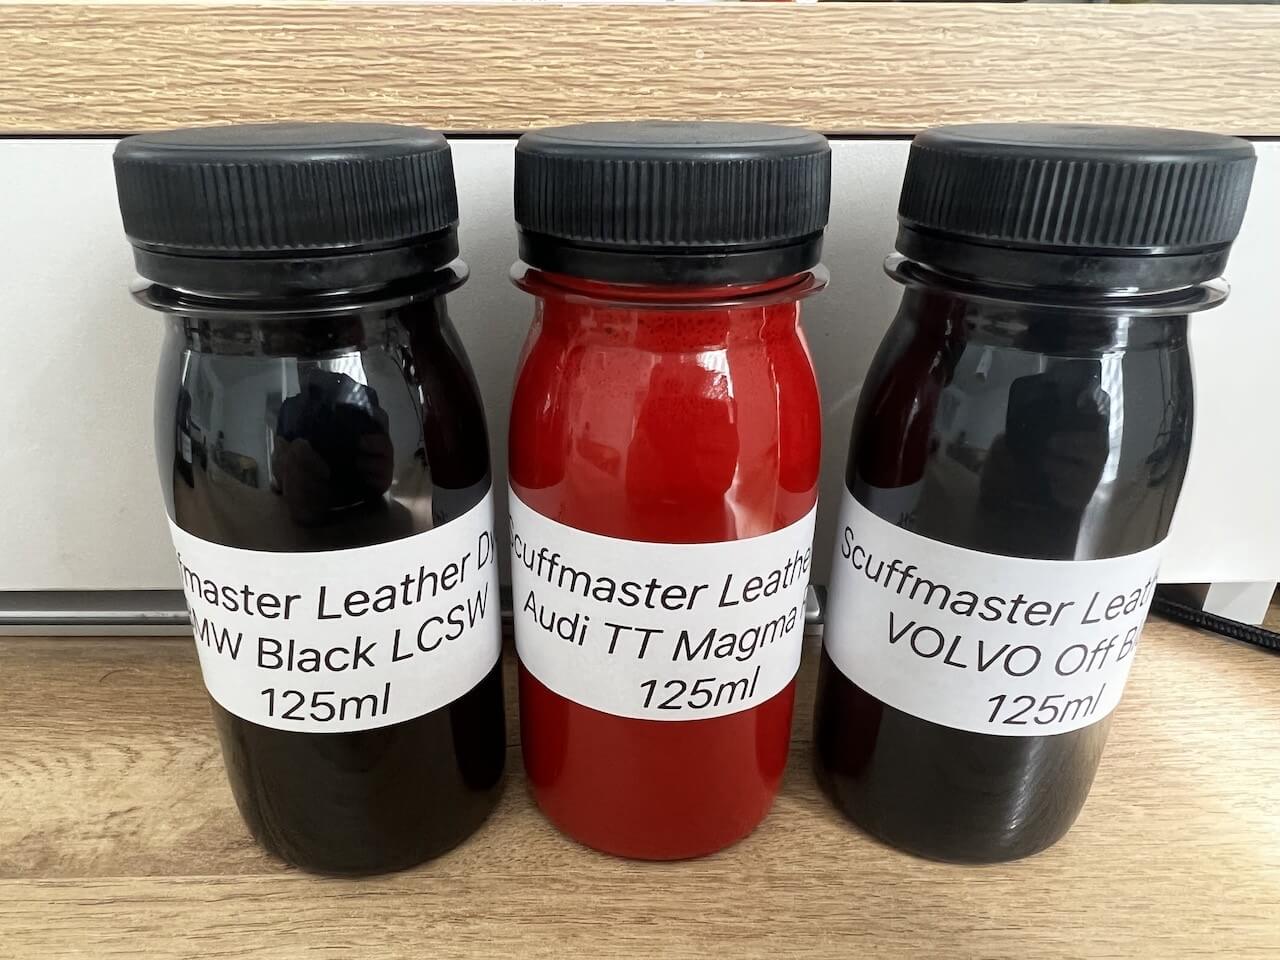 RENAULT SCUFFMASTER LEATHER DYE 125ml BOTTLE